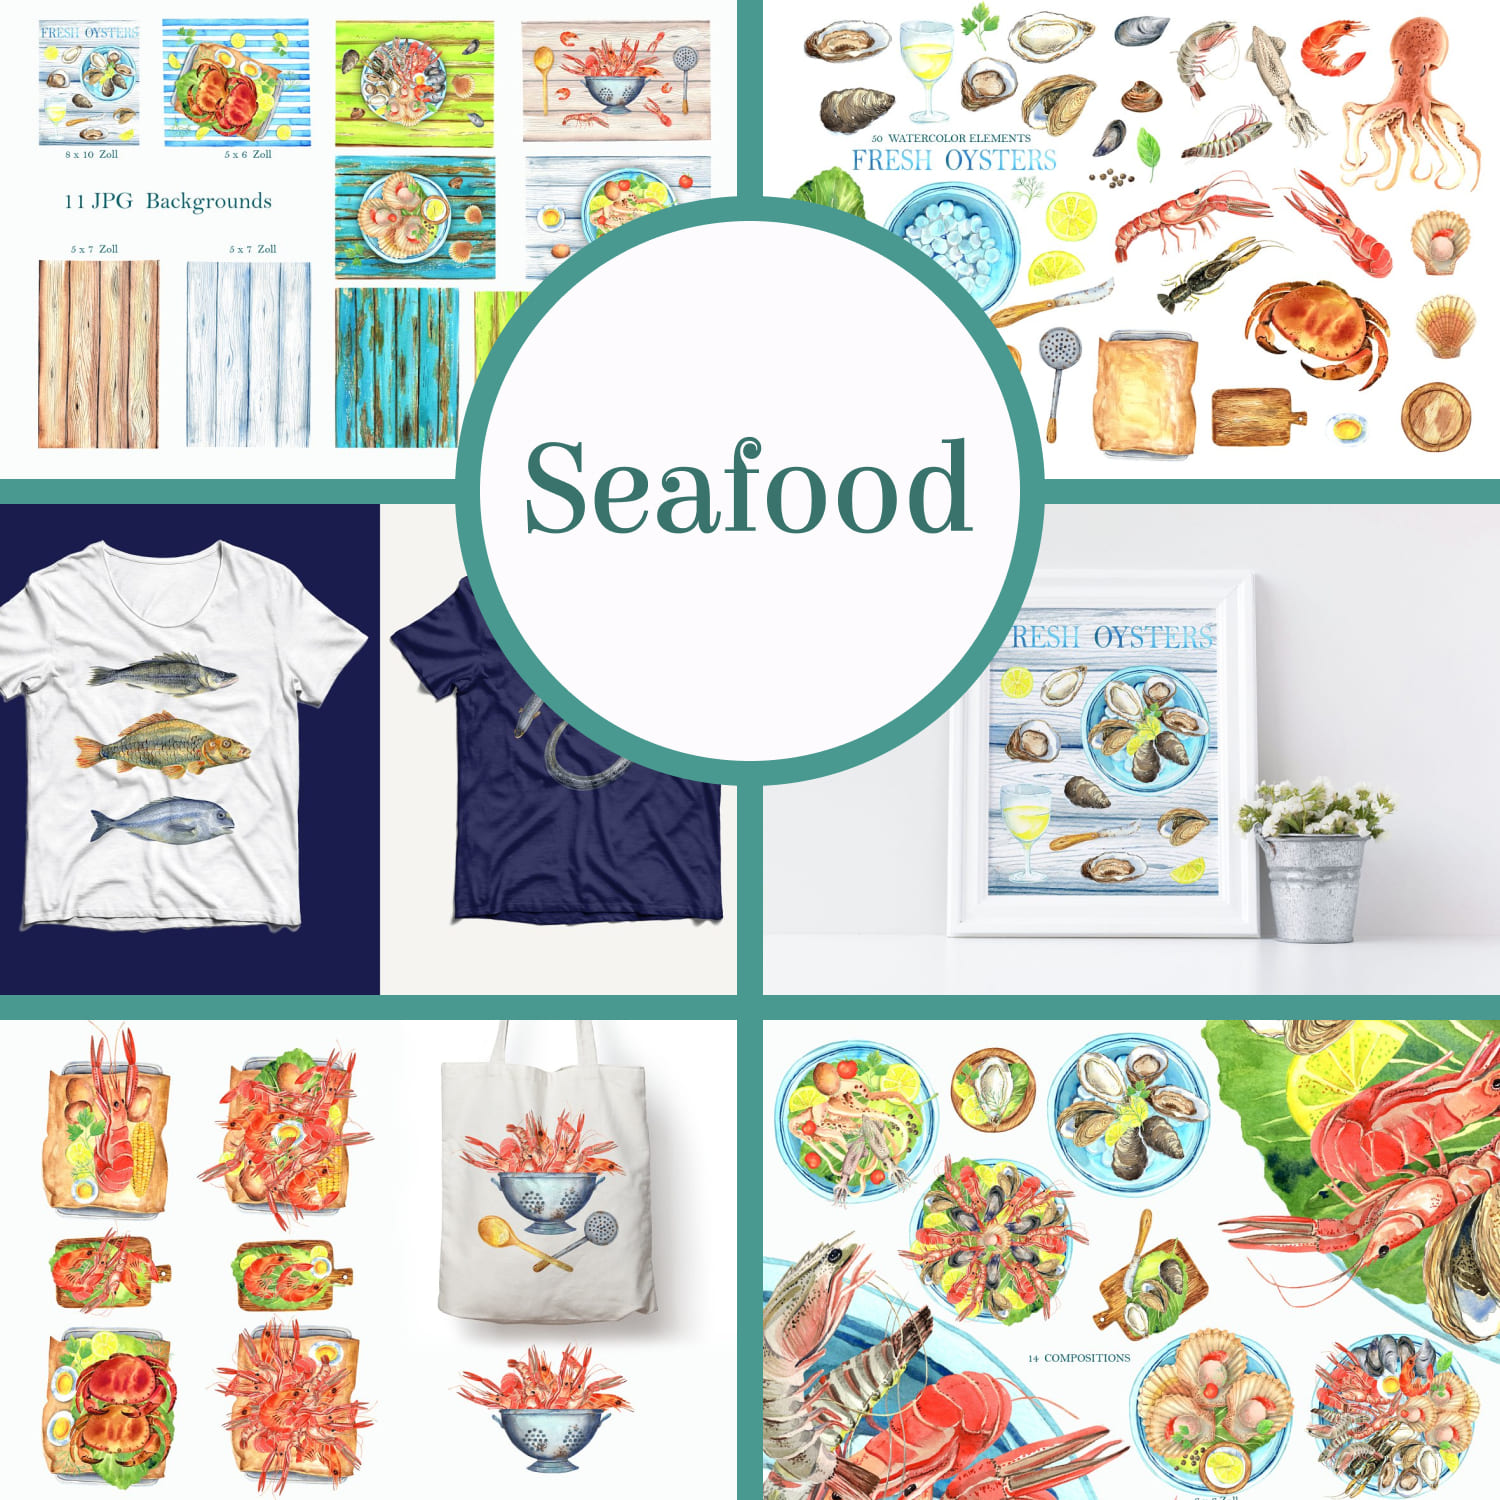 Seafood - main image preview.